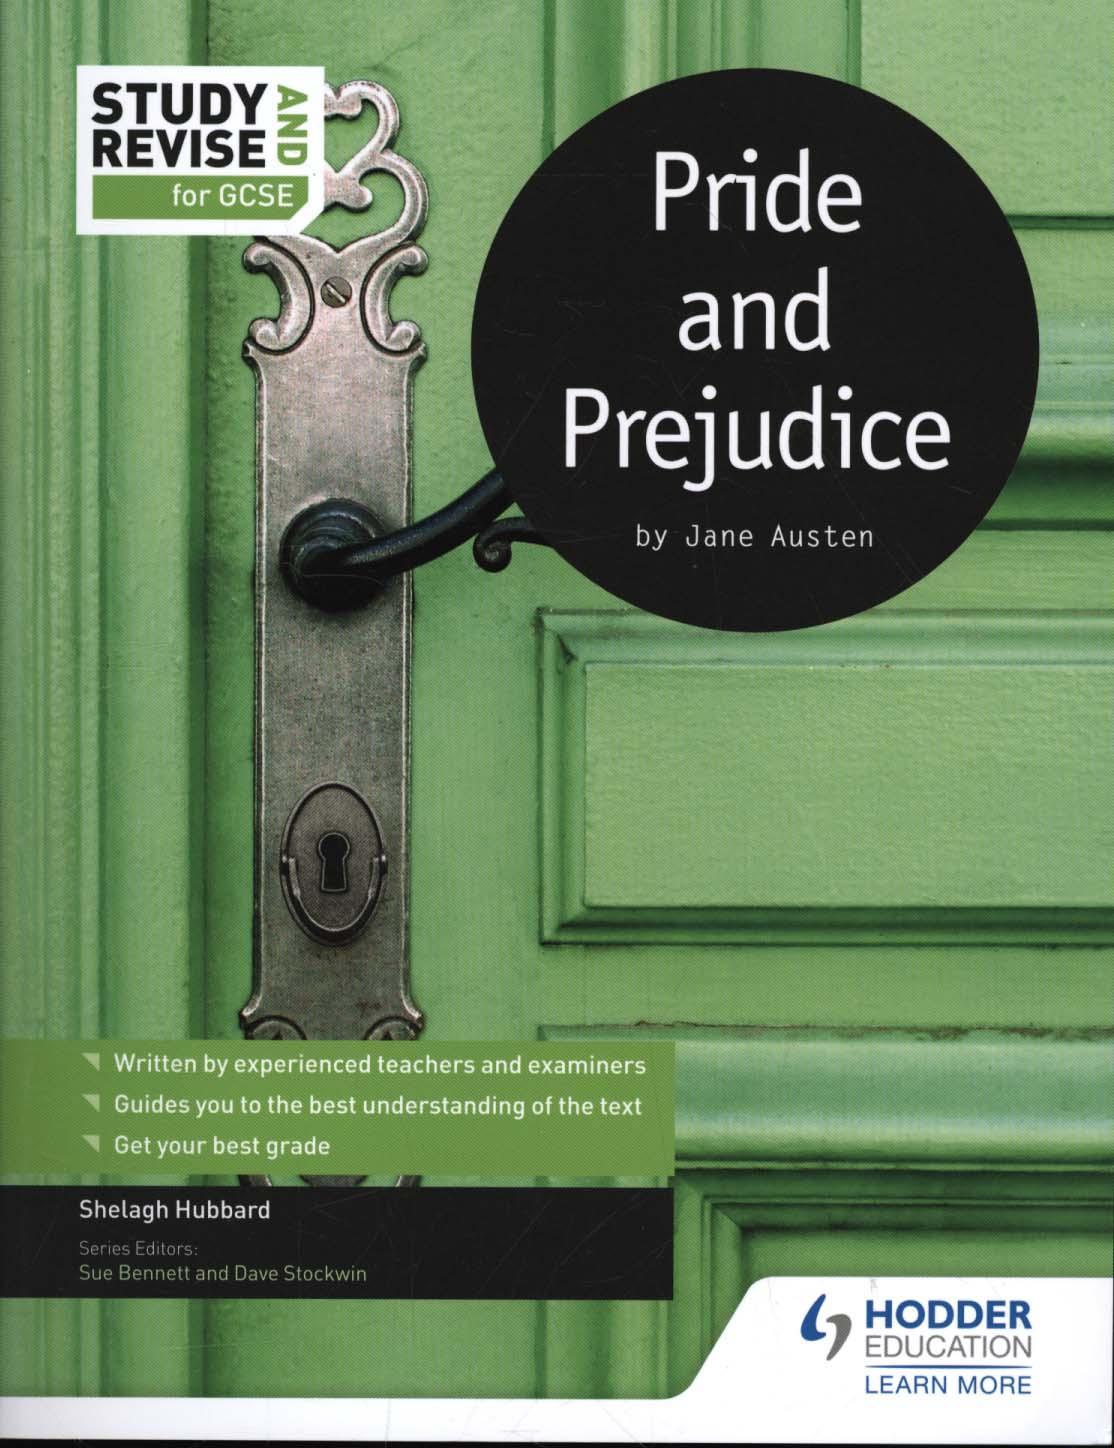 Study and Revise: Pride and Prejudice for GCSE